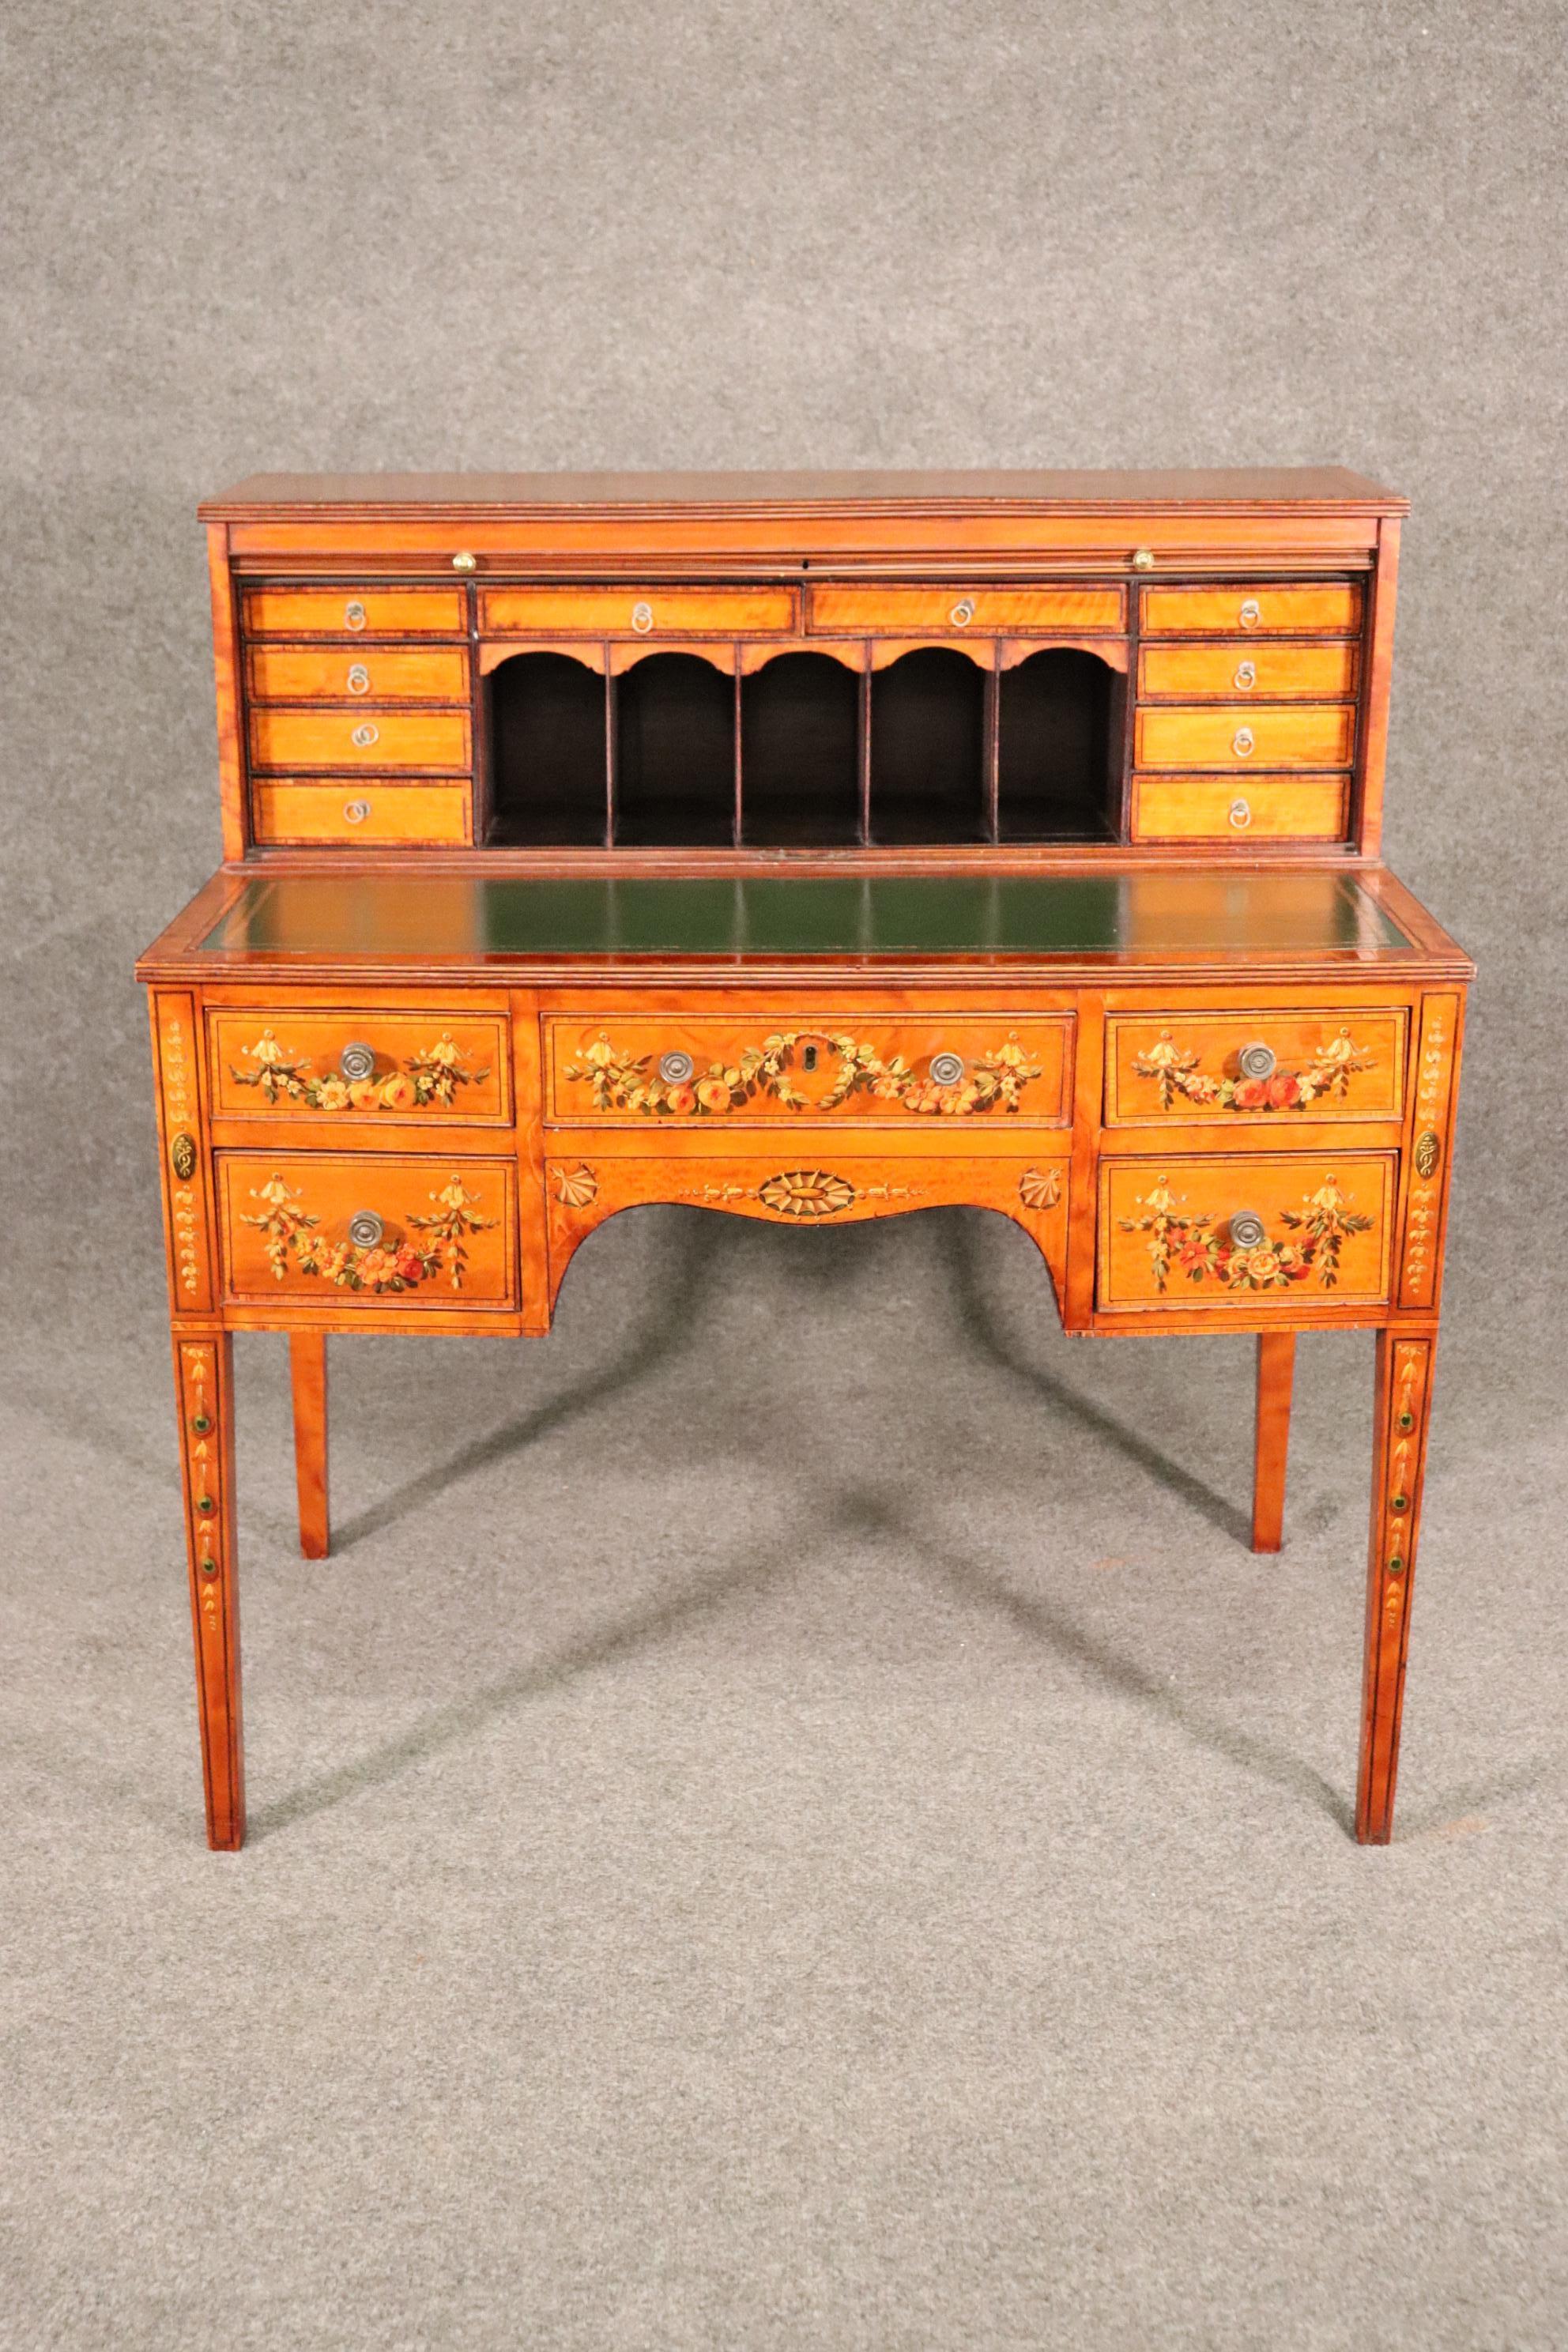 This is a fantastic desk! Look at the amazing painted workmanship and the gorgeous wood quality. The desk measures 40 wide x 42 inches tall x 25 deep. The desk dates to the 1910 era and is in good original condition.